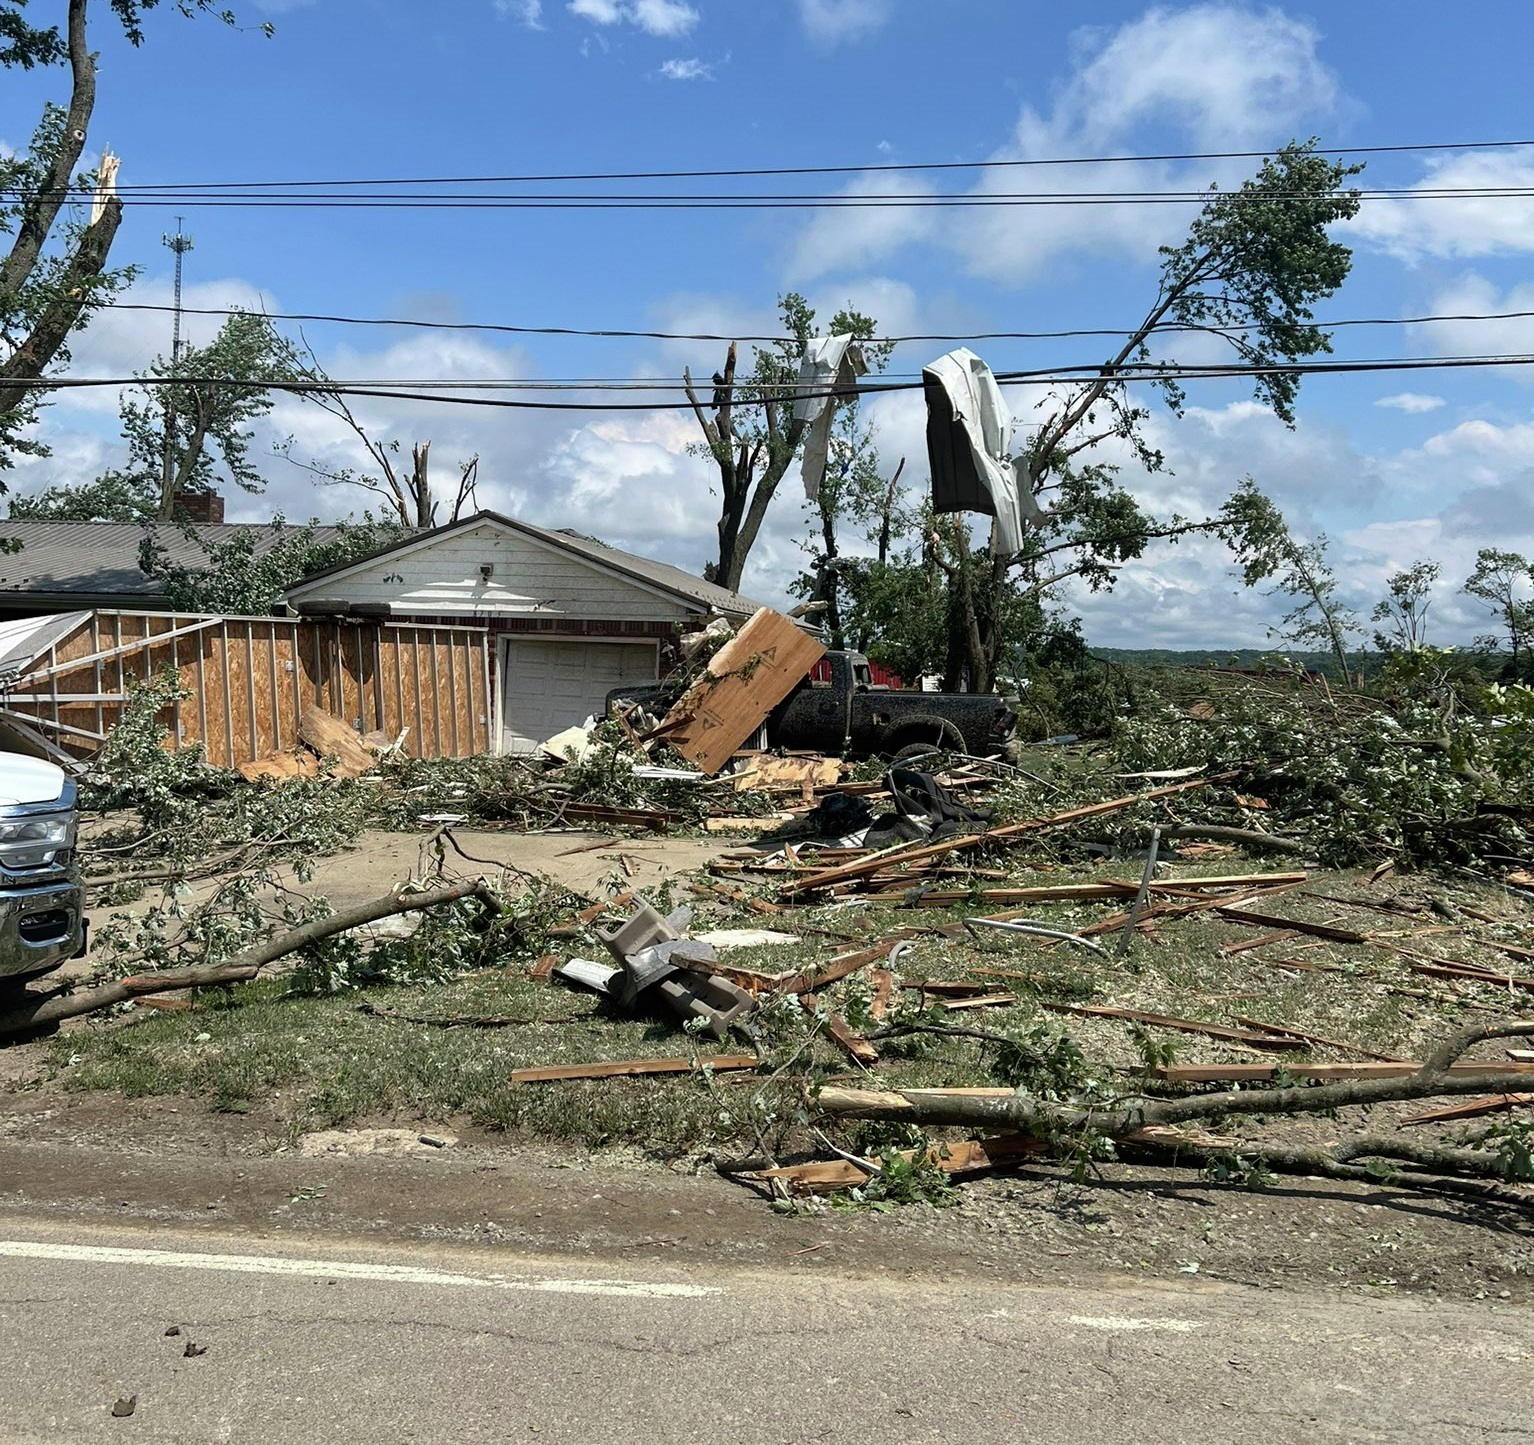 AAA's Insurance Sales and Operations Manager, Dave Kirst on how to best handle insurance companies after sustaining significant storm damage to your home or property